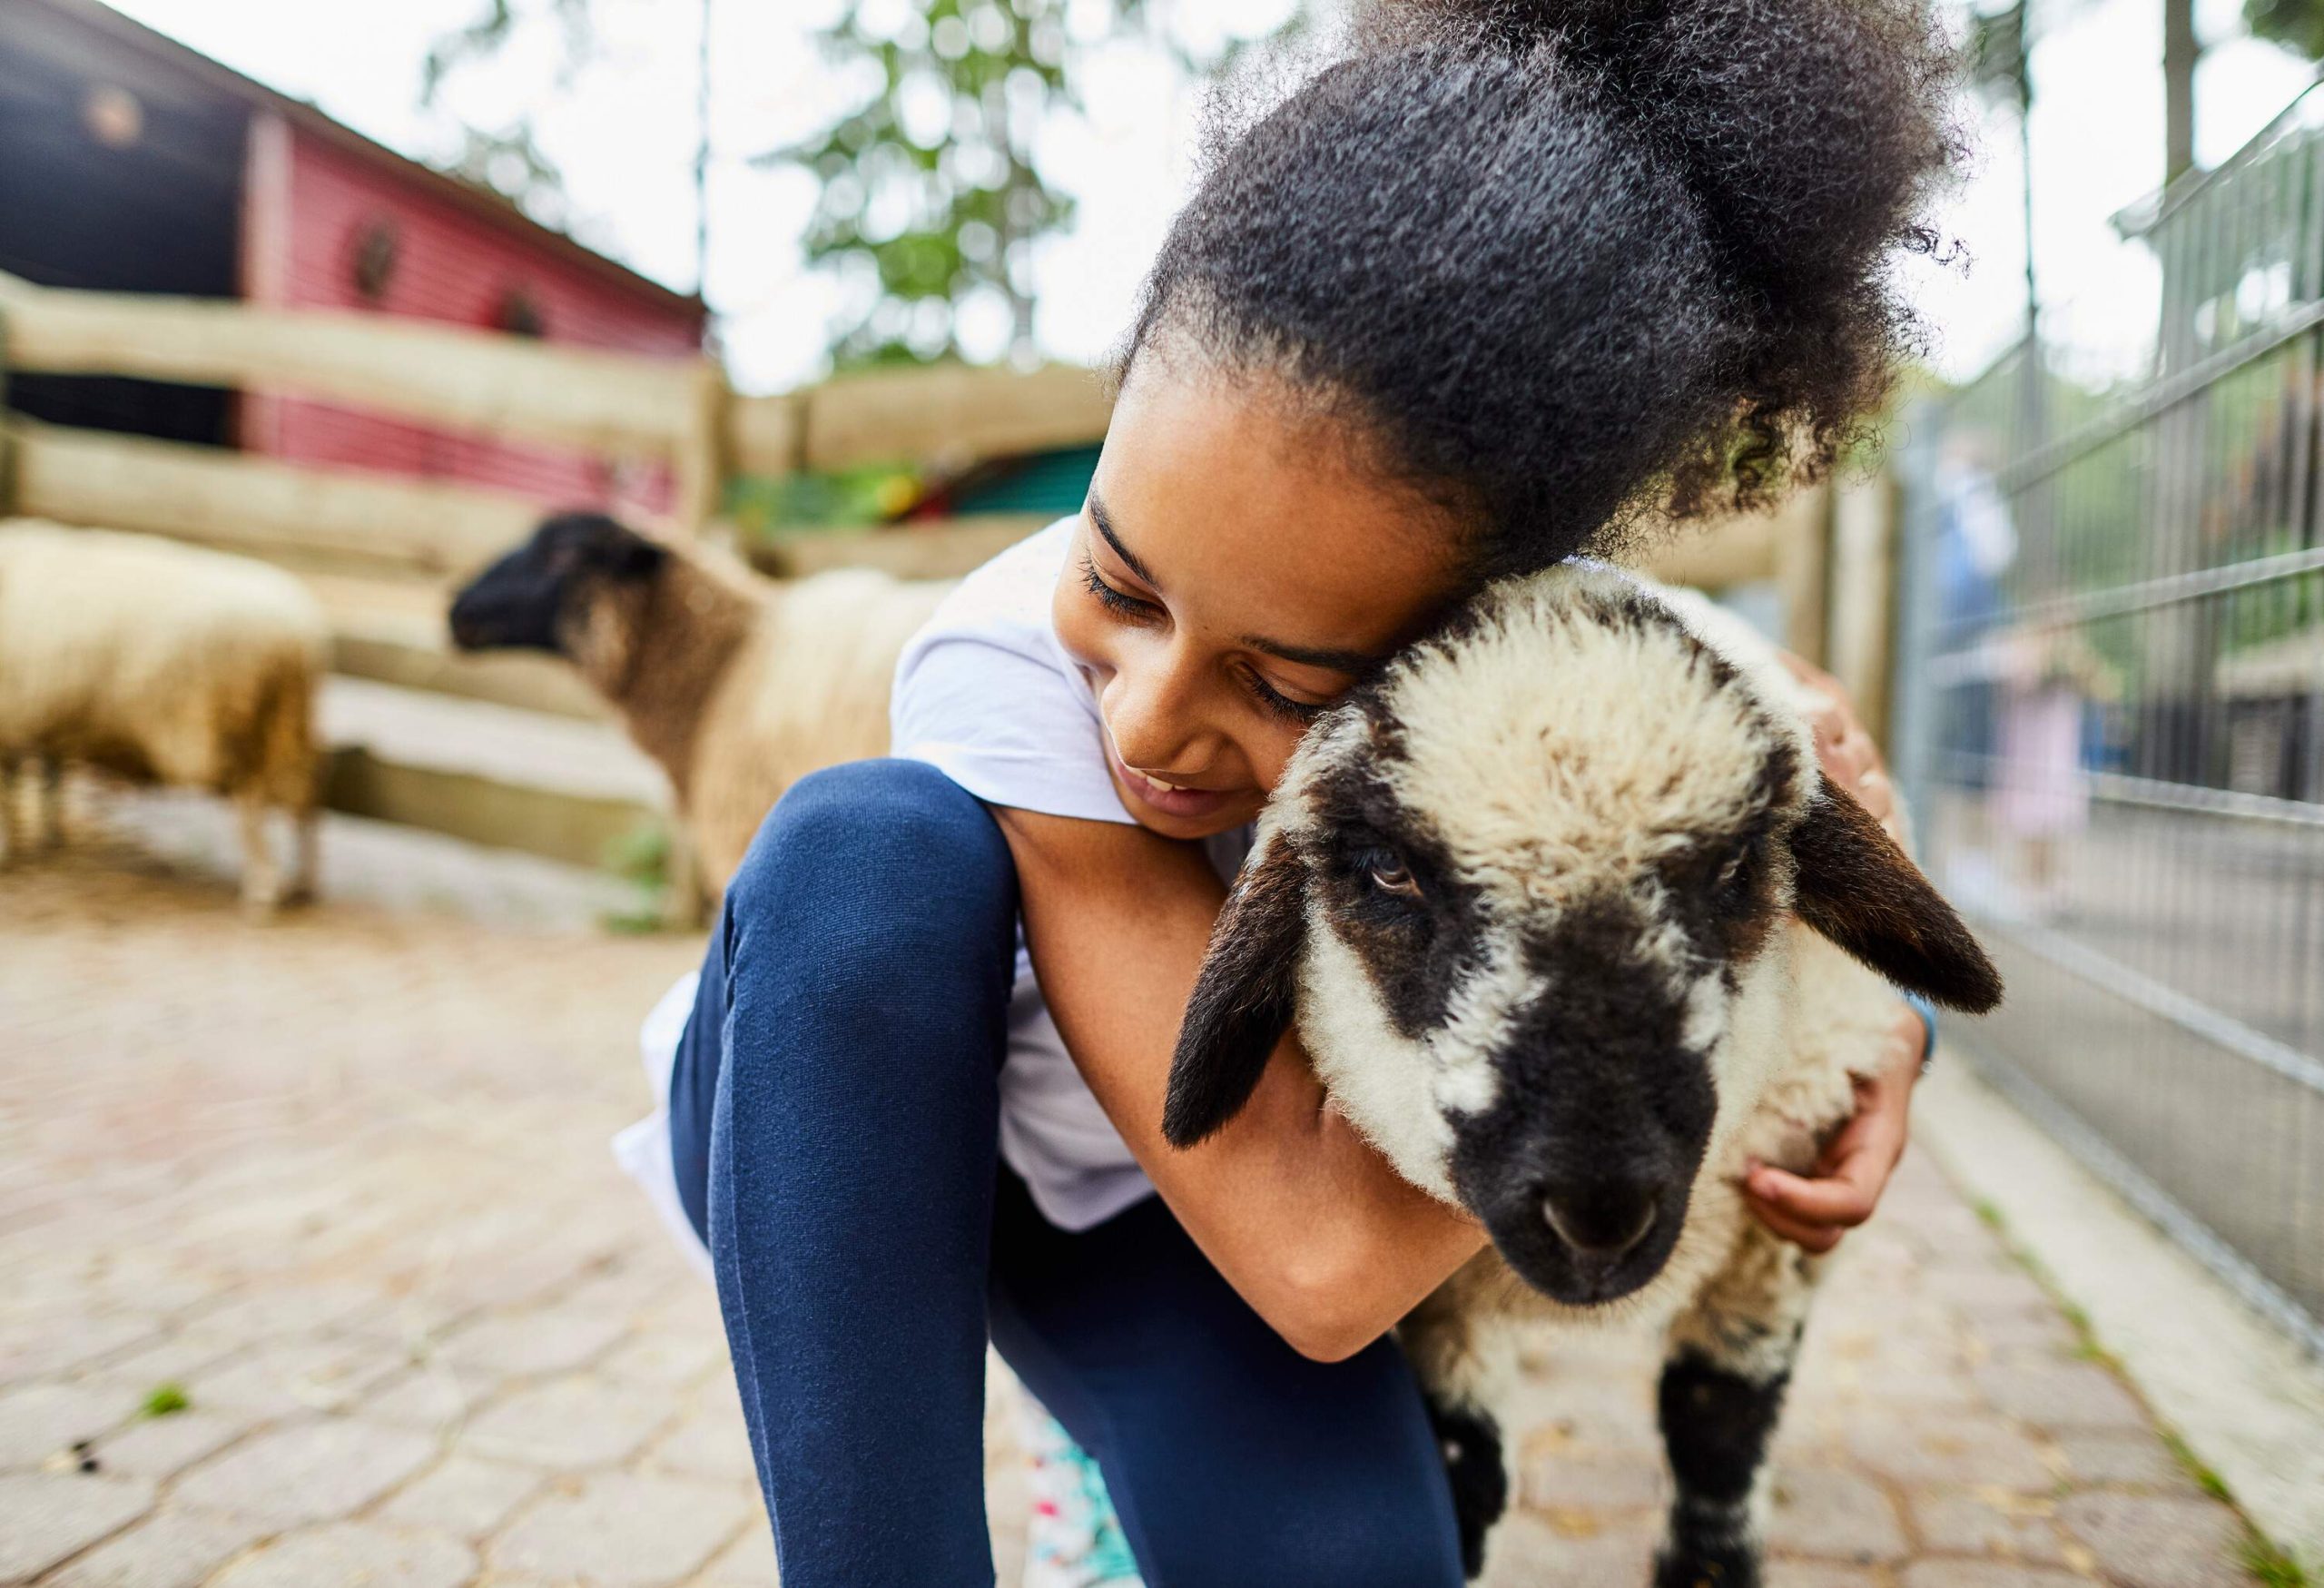 A happy young girl kneels to hug a sheep.